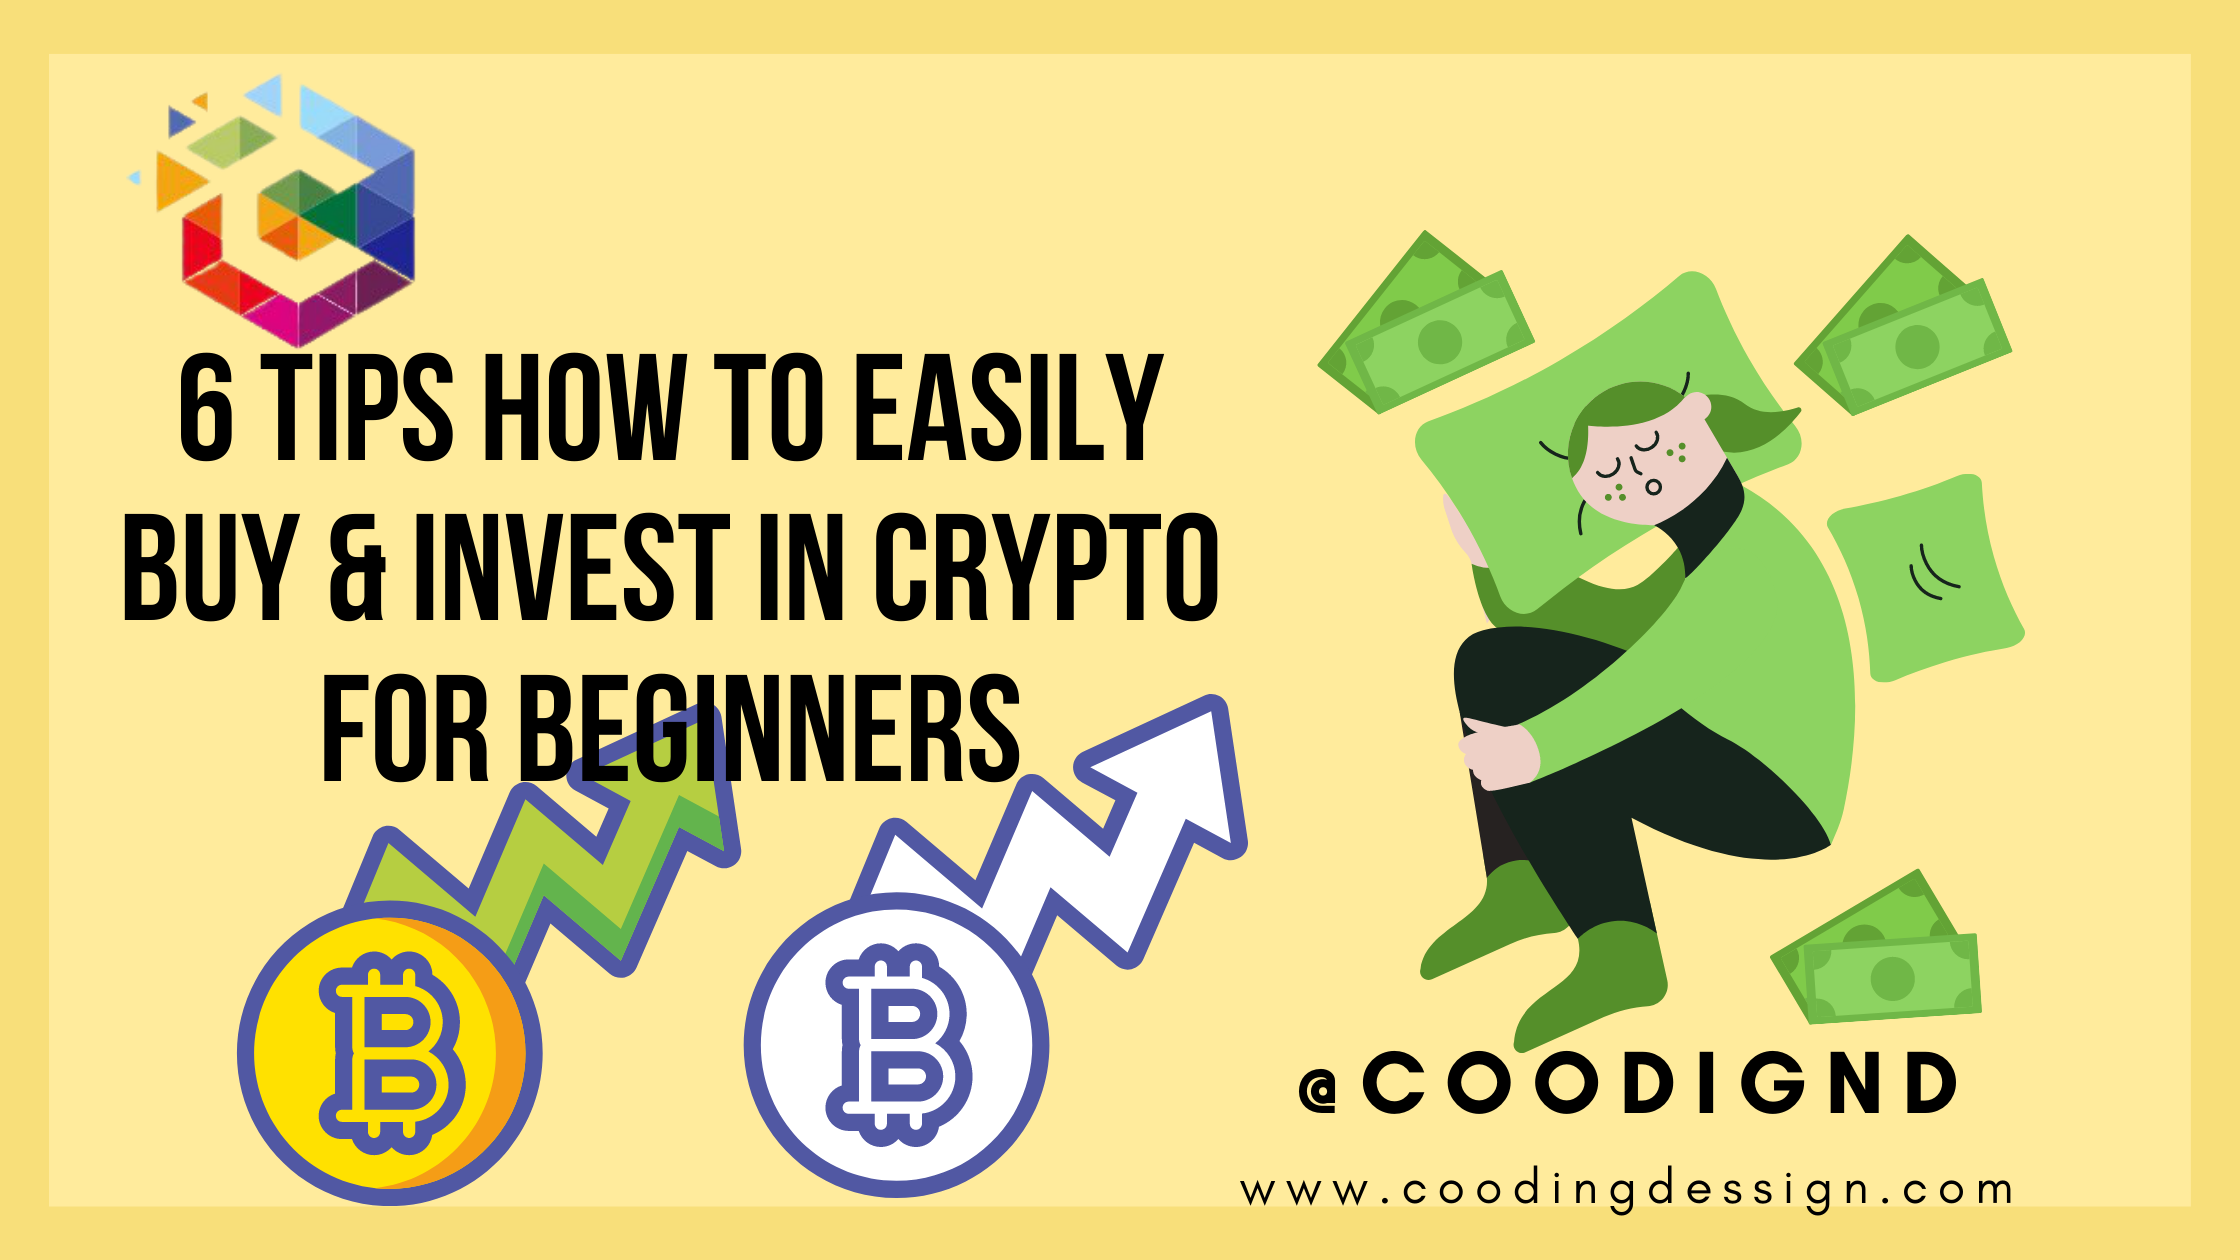 6 Tips how to easily buy & invest in crypto